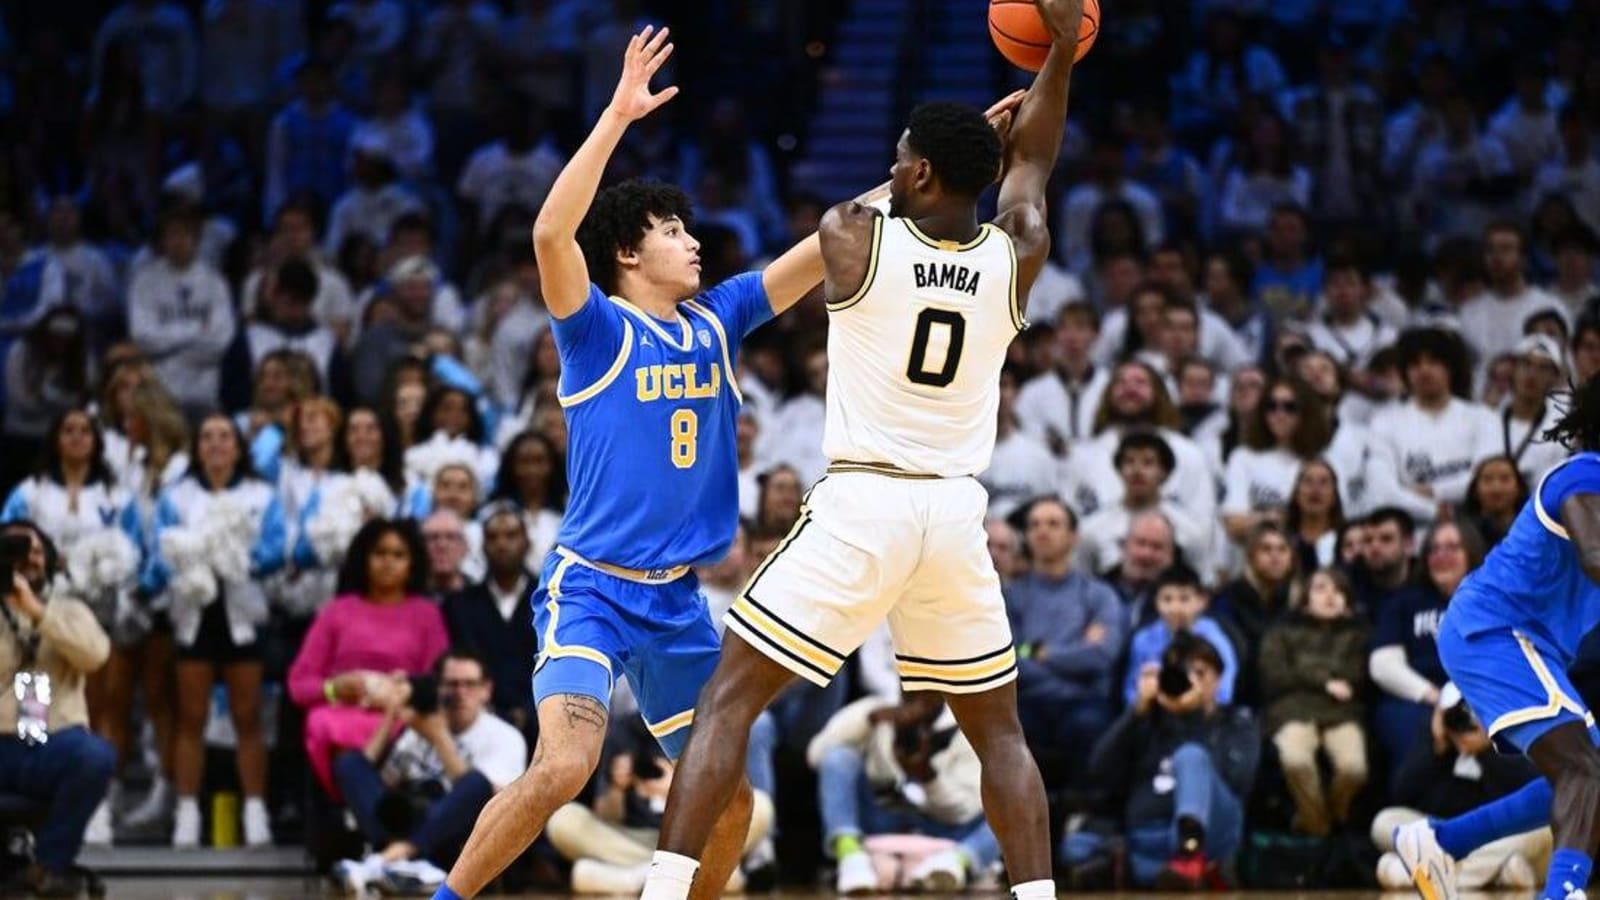 Villanova ends 3-game skid by dropping UCLA